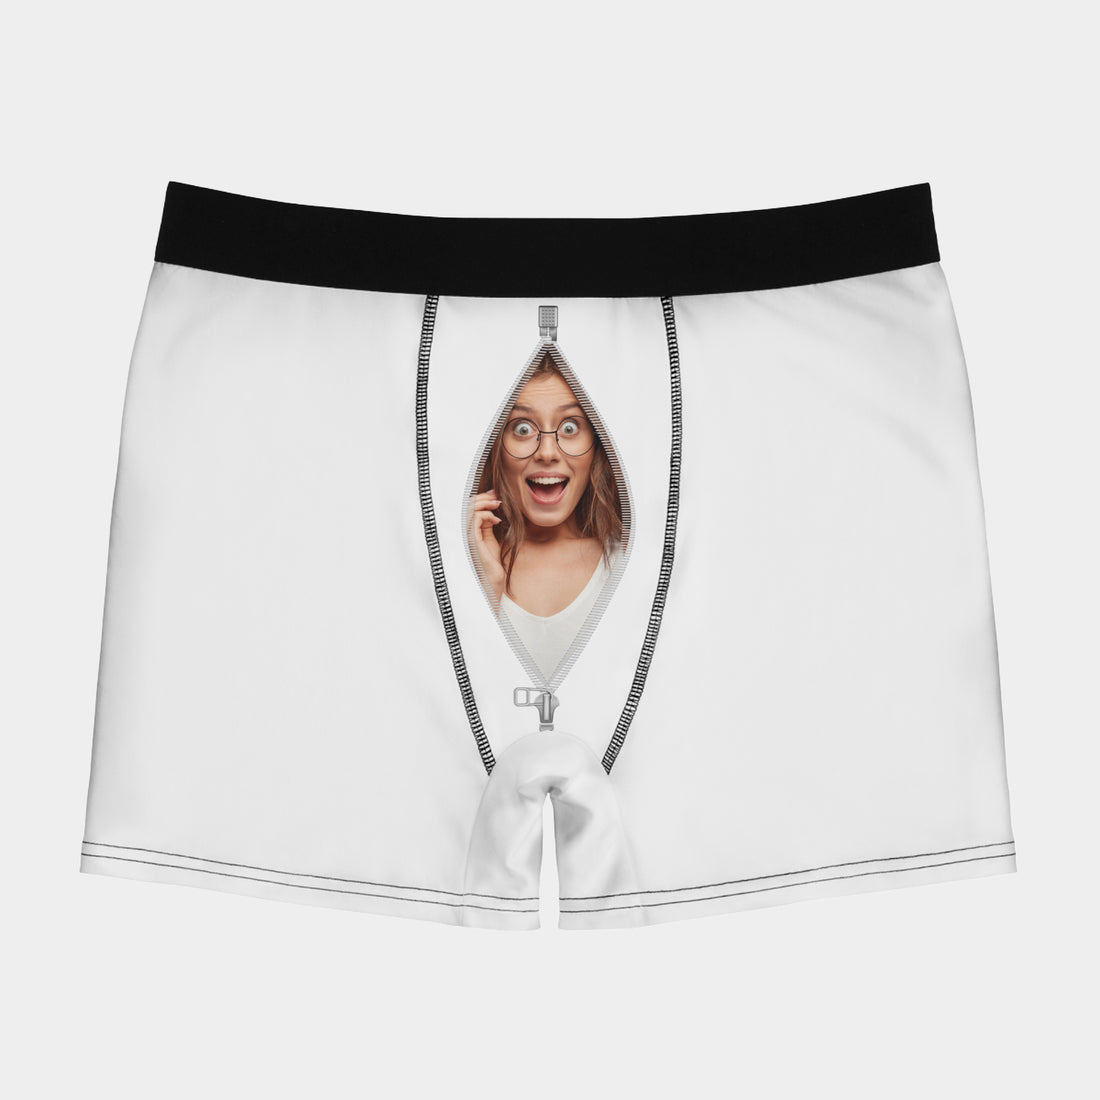 Spicy Personalized Boxers For Men With Face